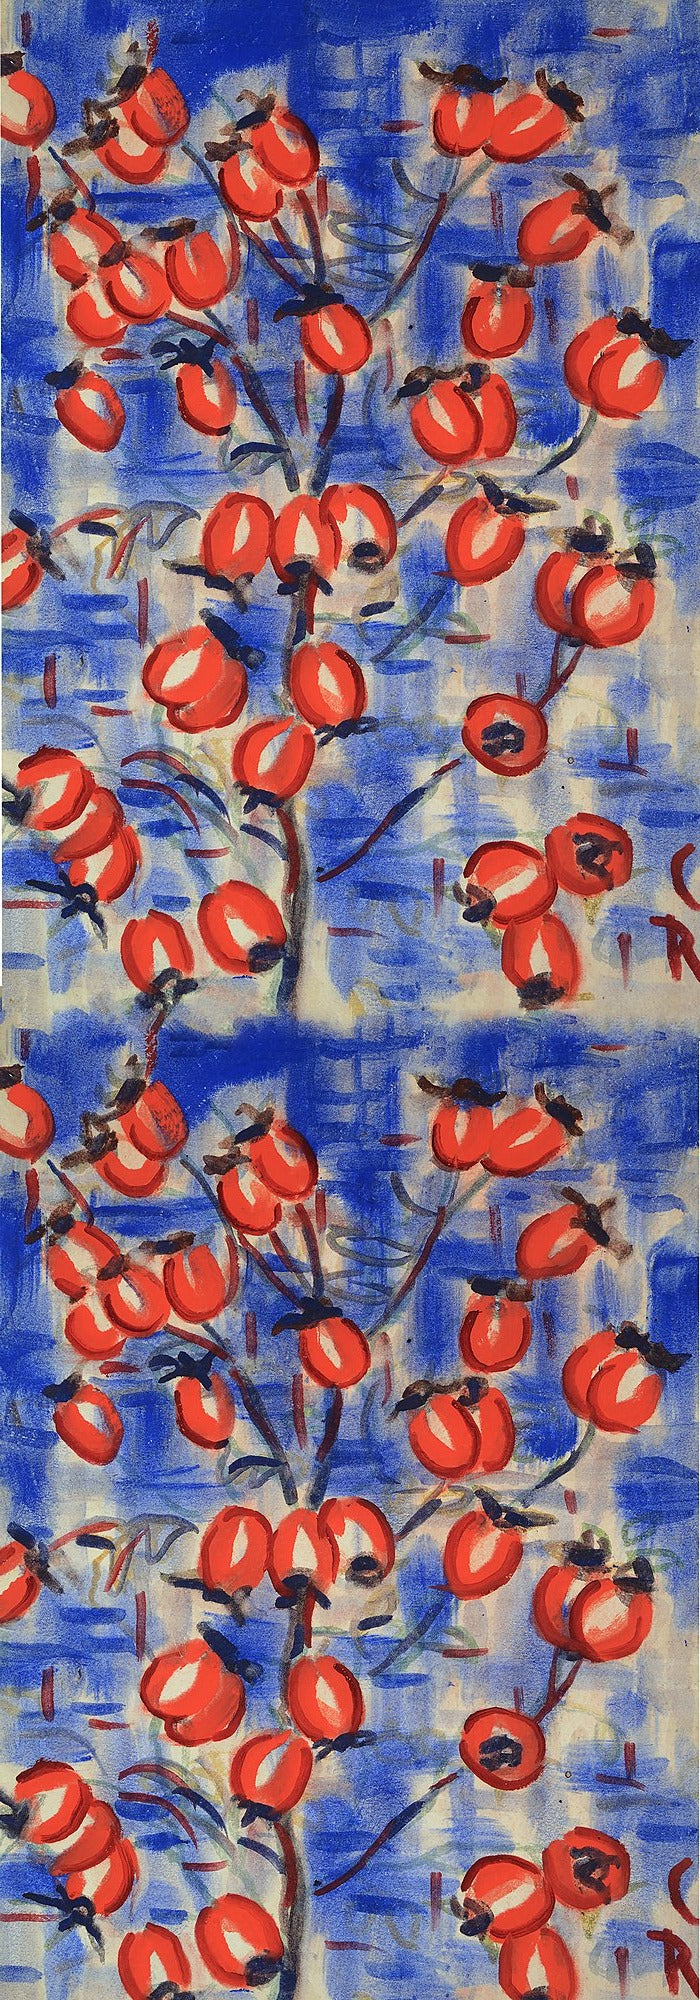 Rosehips (Hagebutten) by Christian Rohlfs, 1915 - Wrapping Paper